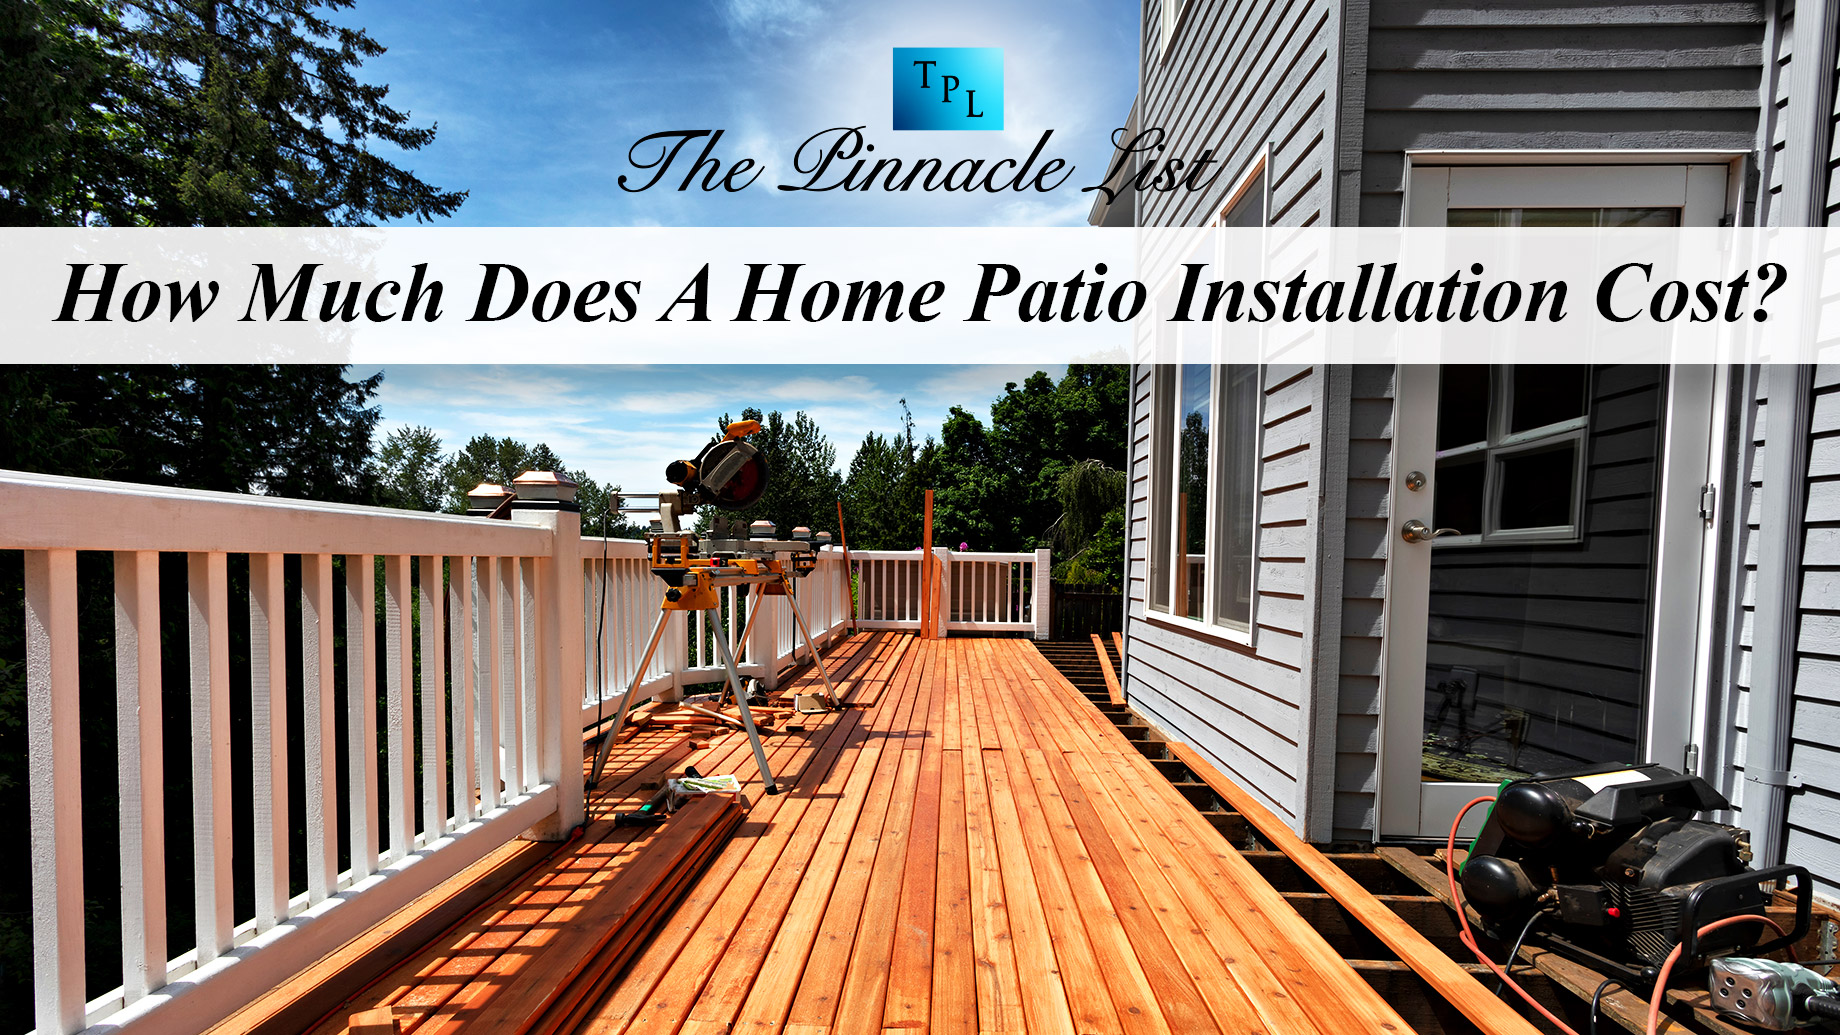 How Much Does A Home Patio Installation Cost?